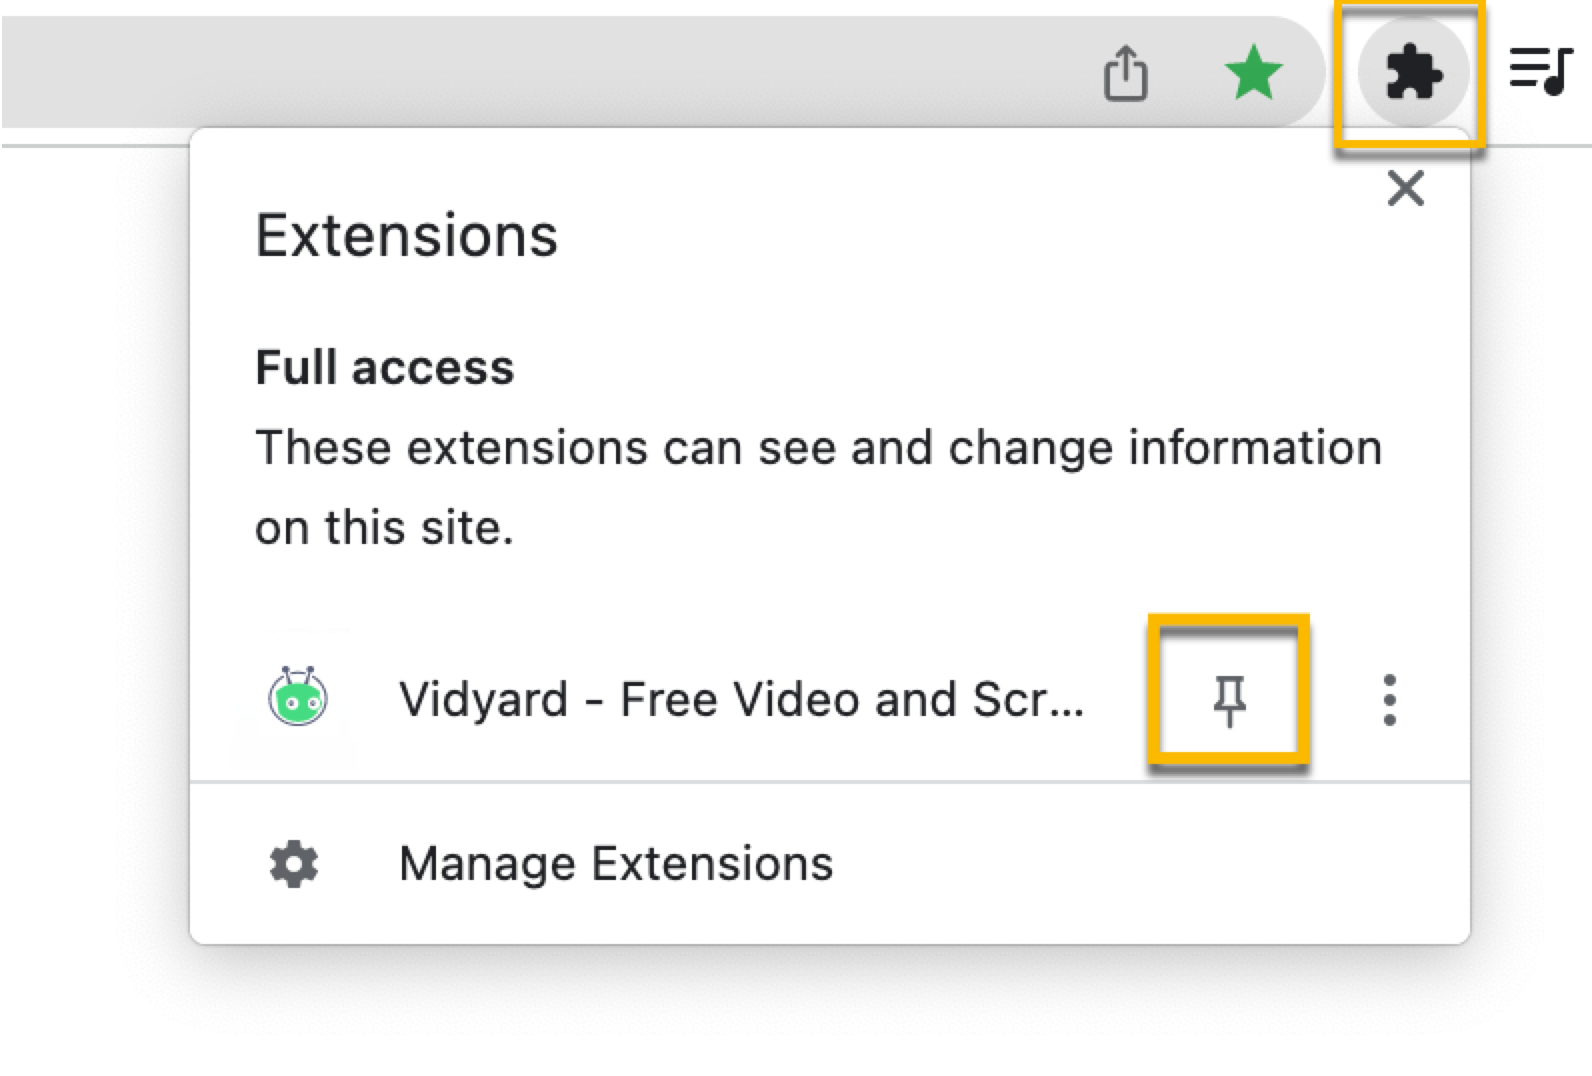 In Chrome, pinning the Vidyard icon to your browser's toolbar